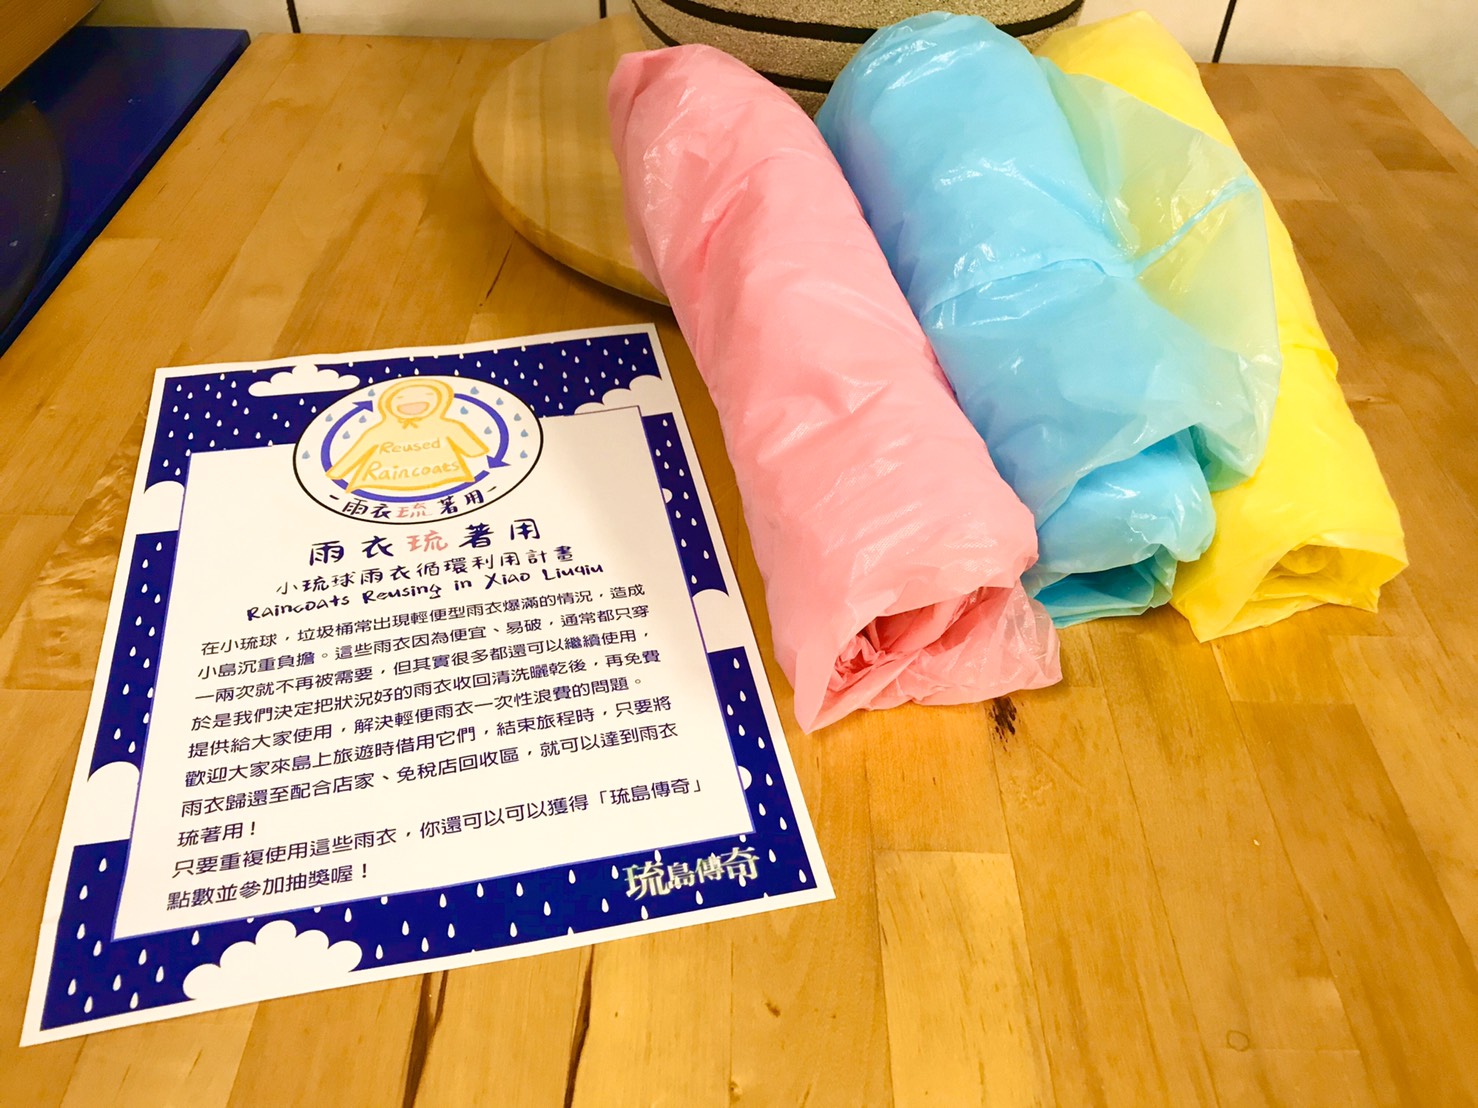 Legend of Little Liuqiu initiated the “Reusable Raincoats in Little Liuqiu” project. They wash and dry the disposable raincoats before placing them at B&Bs and local shops. Visitors can use the raincoats for free. Reusing the raincoats helps to reduce the amount of garbage created by tourists in Little Liuqiu.  (Photo credit: Chen Hung-chun)